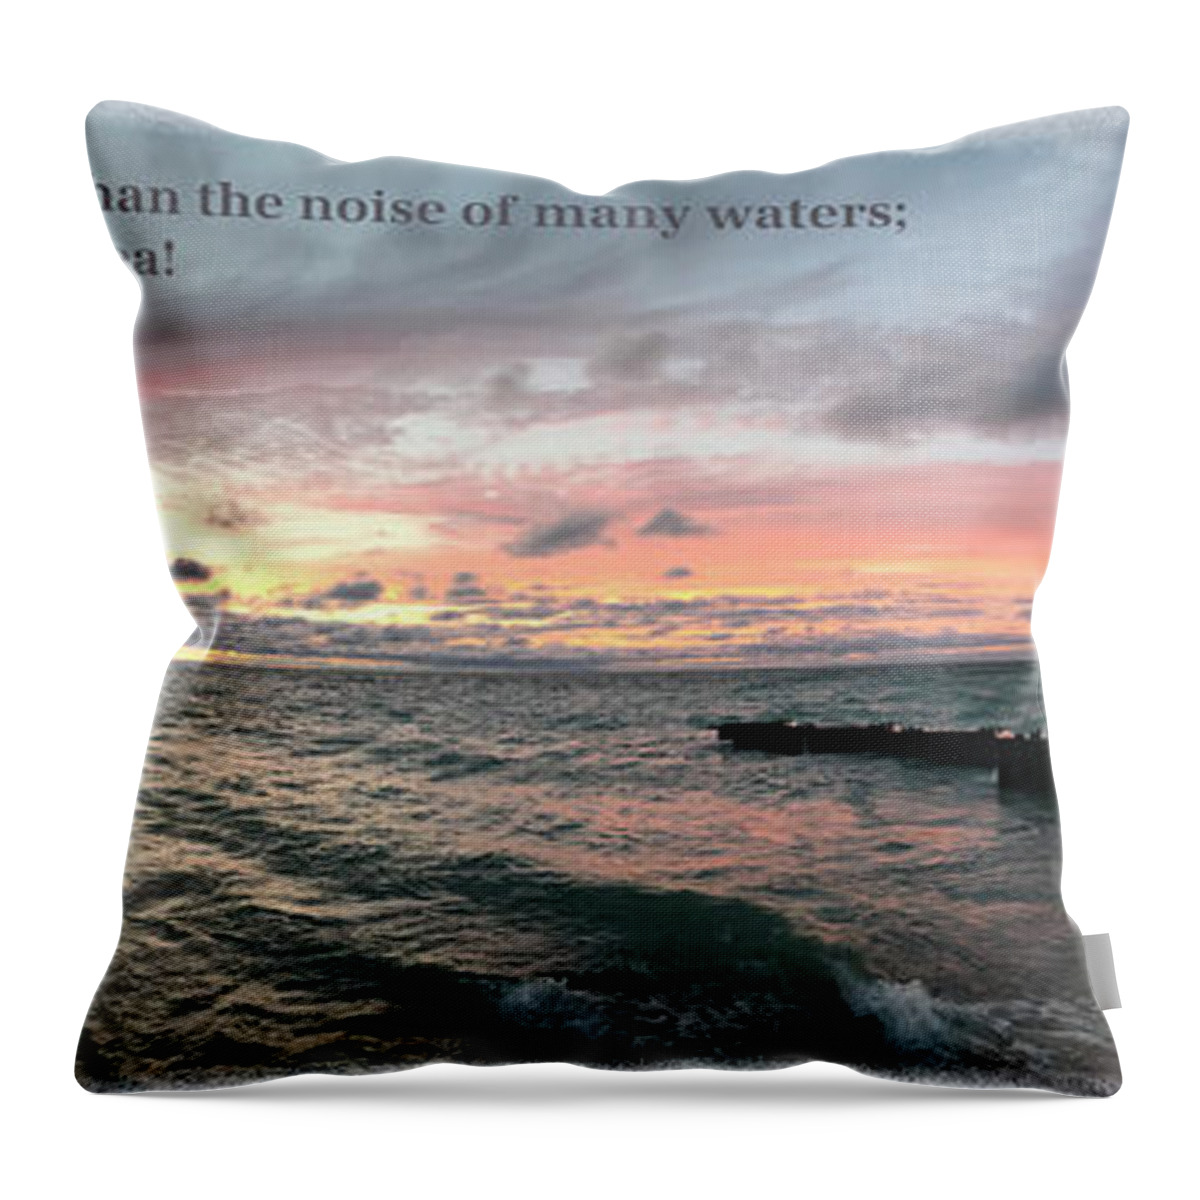  Throw Pillow featuring the photograph Psalm93 4 by Lori Tondini